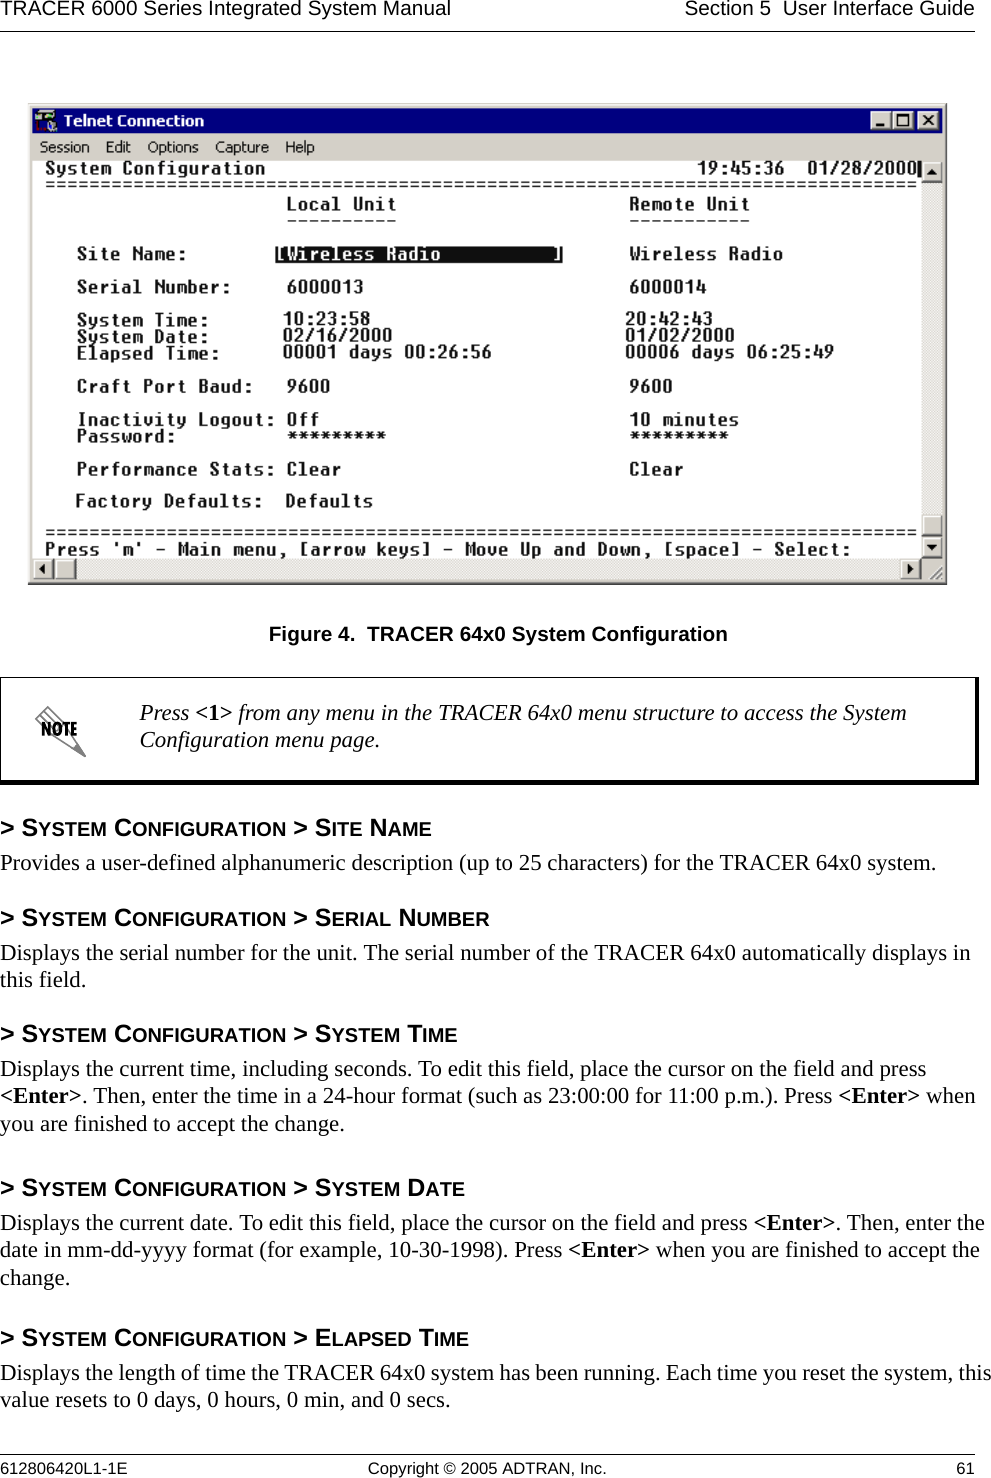 TRACER 6000 Series Integrated System Manual Section 5  User Interface Guide612806420L1-1E Copyright © 2005 ADTRAN, Inc. 61Figure 4.  TRACER 64x0 System Configuration&gt; SYSTEM CONFIGURATION &gt; SITE NAMEProvides a user-defined alphanumeric description (up to 25 characters) for the TRACER 64x0 system.&gt; SYSTEM CONFIGURATION &gt; SERIAL NUMBERDisplays the serial number for the unit. The serial number of the TRACER 64x0 automatically displays in this field.&gt; SYSTEM CONFIGURATION &gt; SYSTEM TIMEDisplays the current time, including seconds. To edit this field, place the cursor on the field and press &lt;Enter&gt;. Then, enter the time in a 24-hour format (such as 23:00:00 for 11:00 p.m.). Press &lt;Enter&gt; when you are finished to accept the change. &gt; SYSTEM CONFIGURATION &gt; SYSTEM DATEDisplays the current date. To edit this field, place the cursor on the field and press &lt;Enter&gt;. Then, enter the date in mm-dd-yyyy format (for example, 10-30-1998). Press &lt;Enter&gt; when you are finished to accept the change.&gt; SYSTEM CONFIGURATION &gt; ELAPSED TIMEDisplays the length of time the TRACER 64x0 system has been running. Each time you reset the system, this value resets to 0 days, 0 hours, 0 min, and 0 secs.Press &lt;1&gt; from any menu in the TRACER 64x0 menu structure to access the System Configuration menu page.